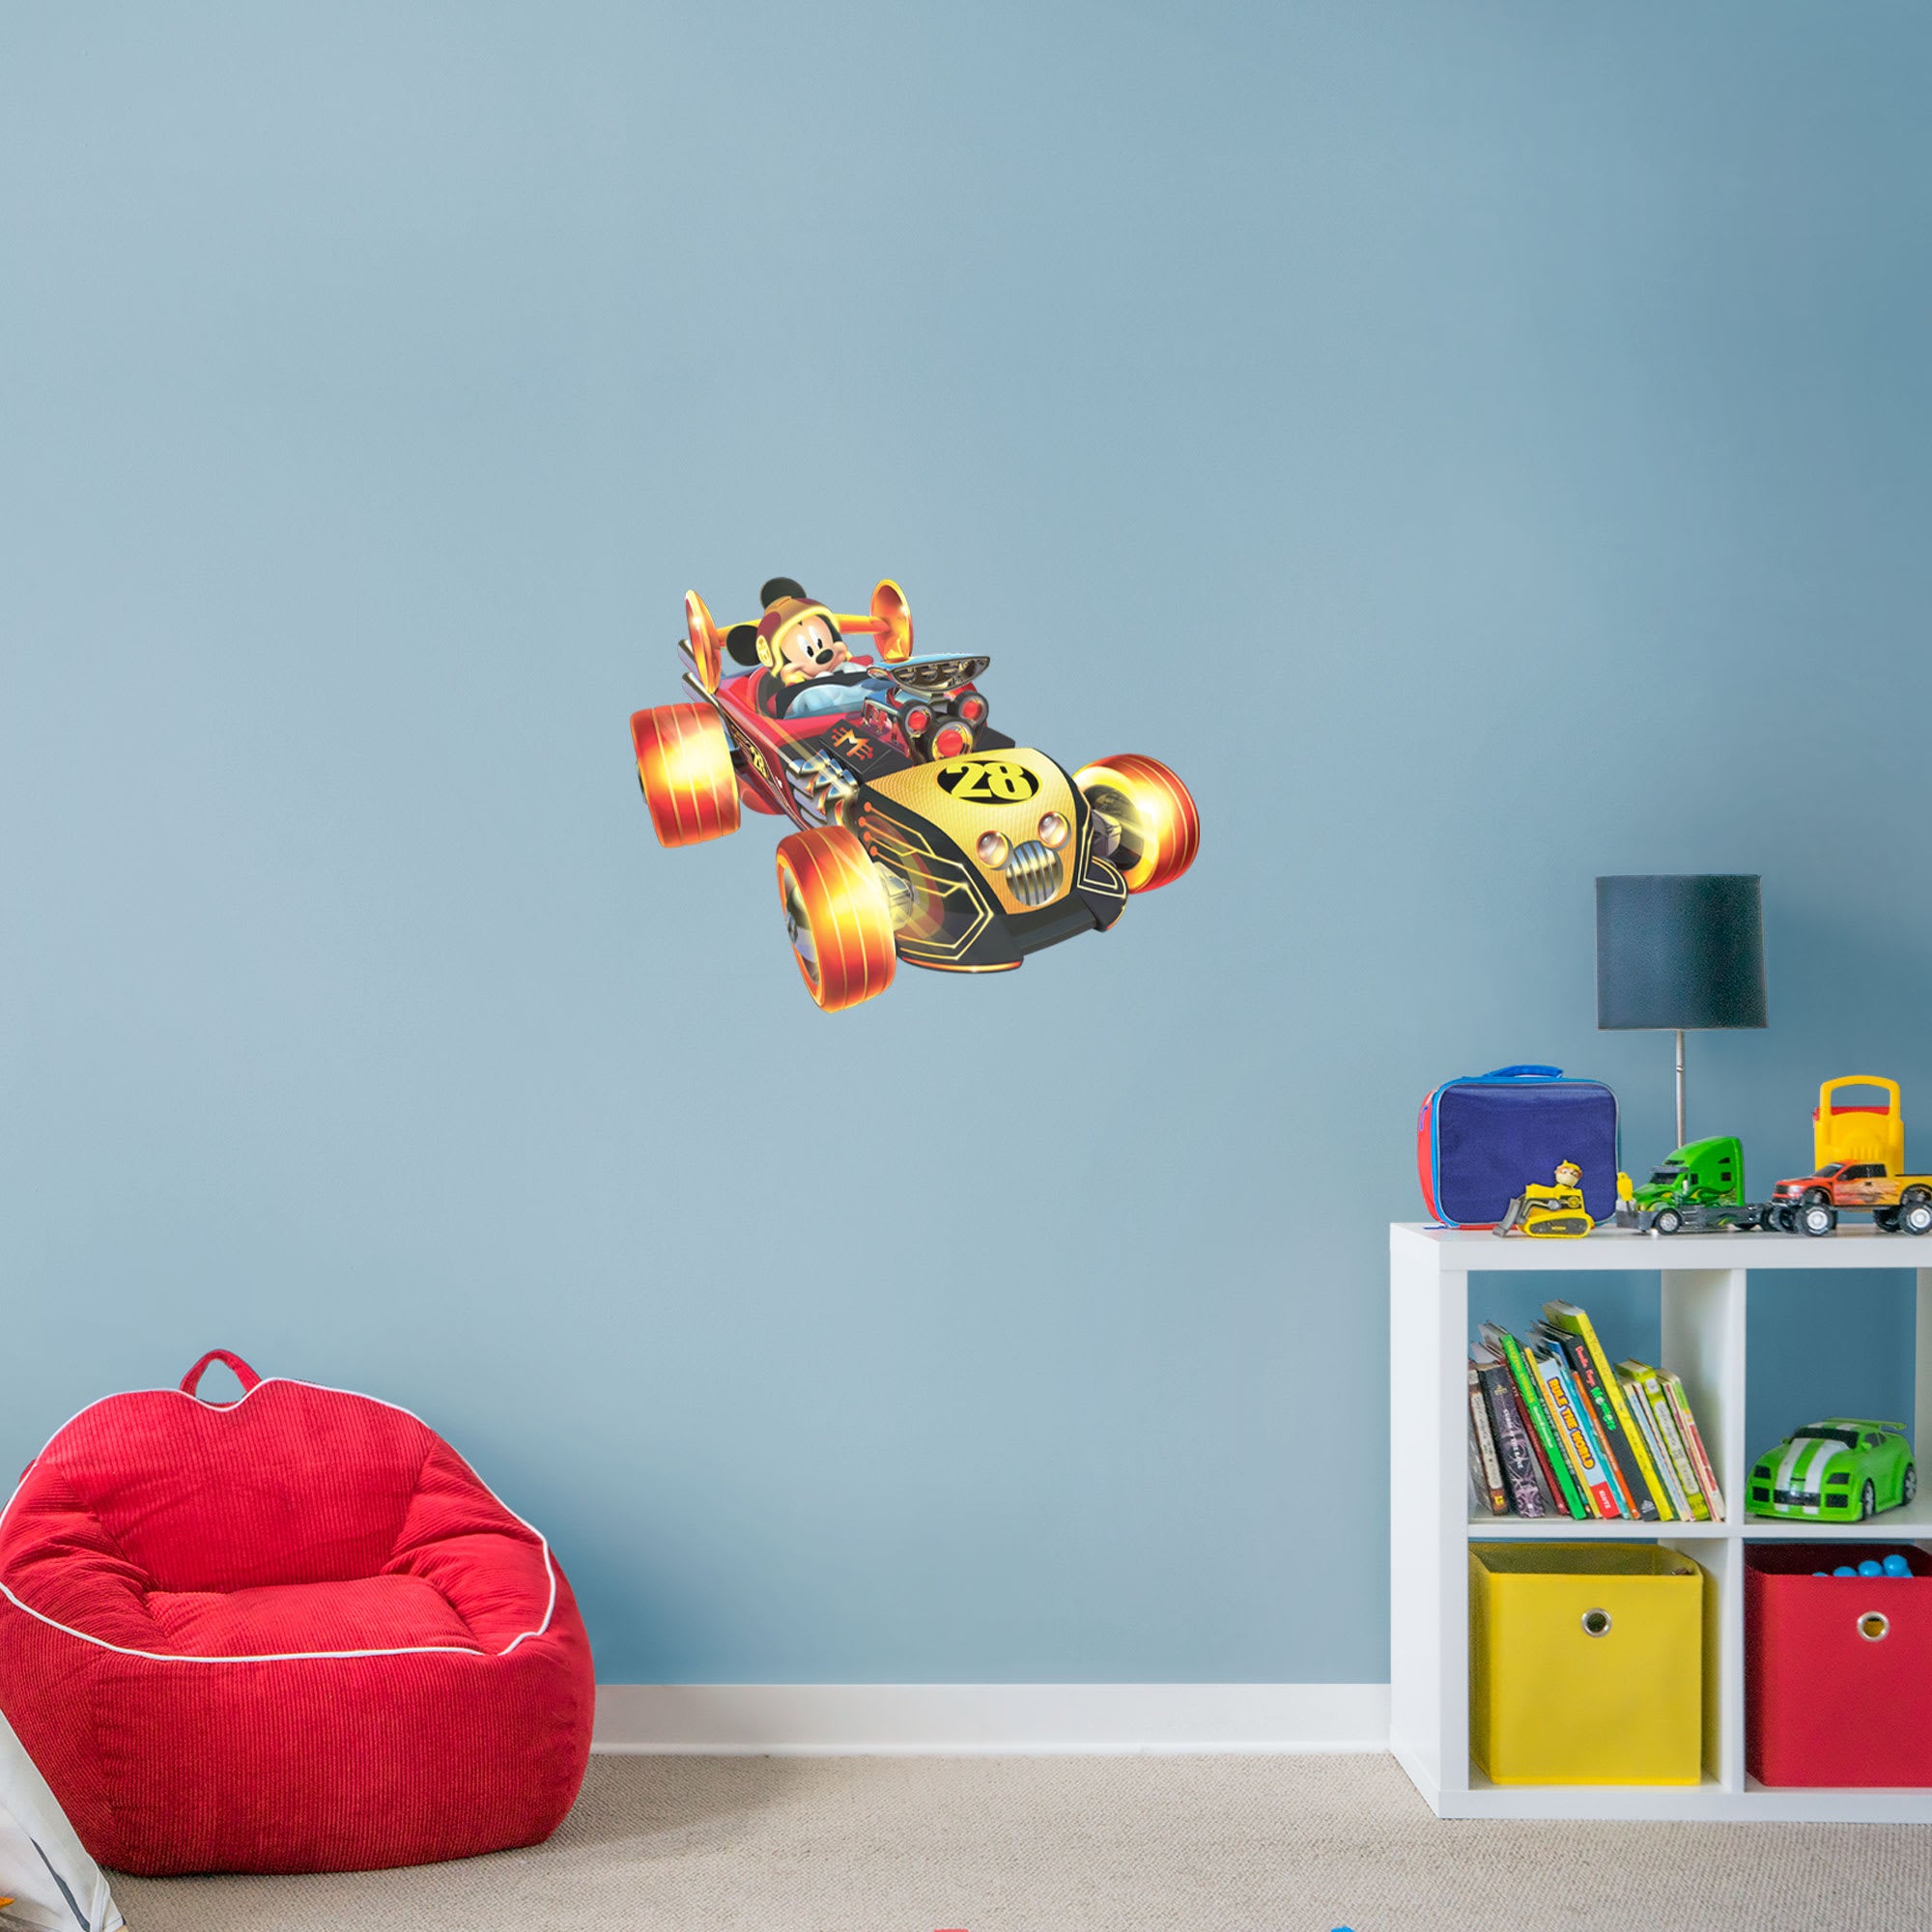 Mickey and the Roadster Racers: Mickey Mouse Racecar - Officially Licensed Disney Removable Wall Decal XL by Fathead | Vinyl